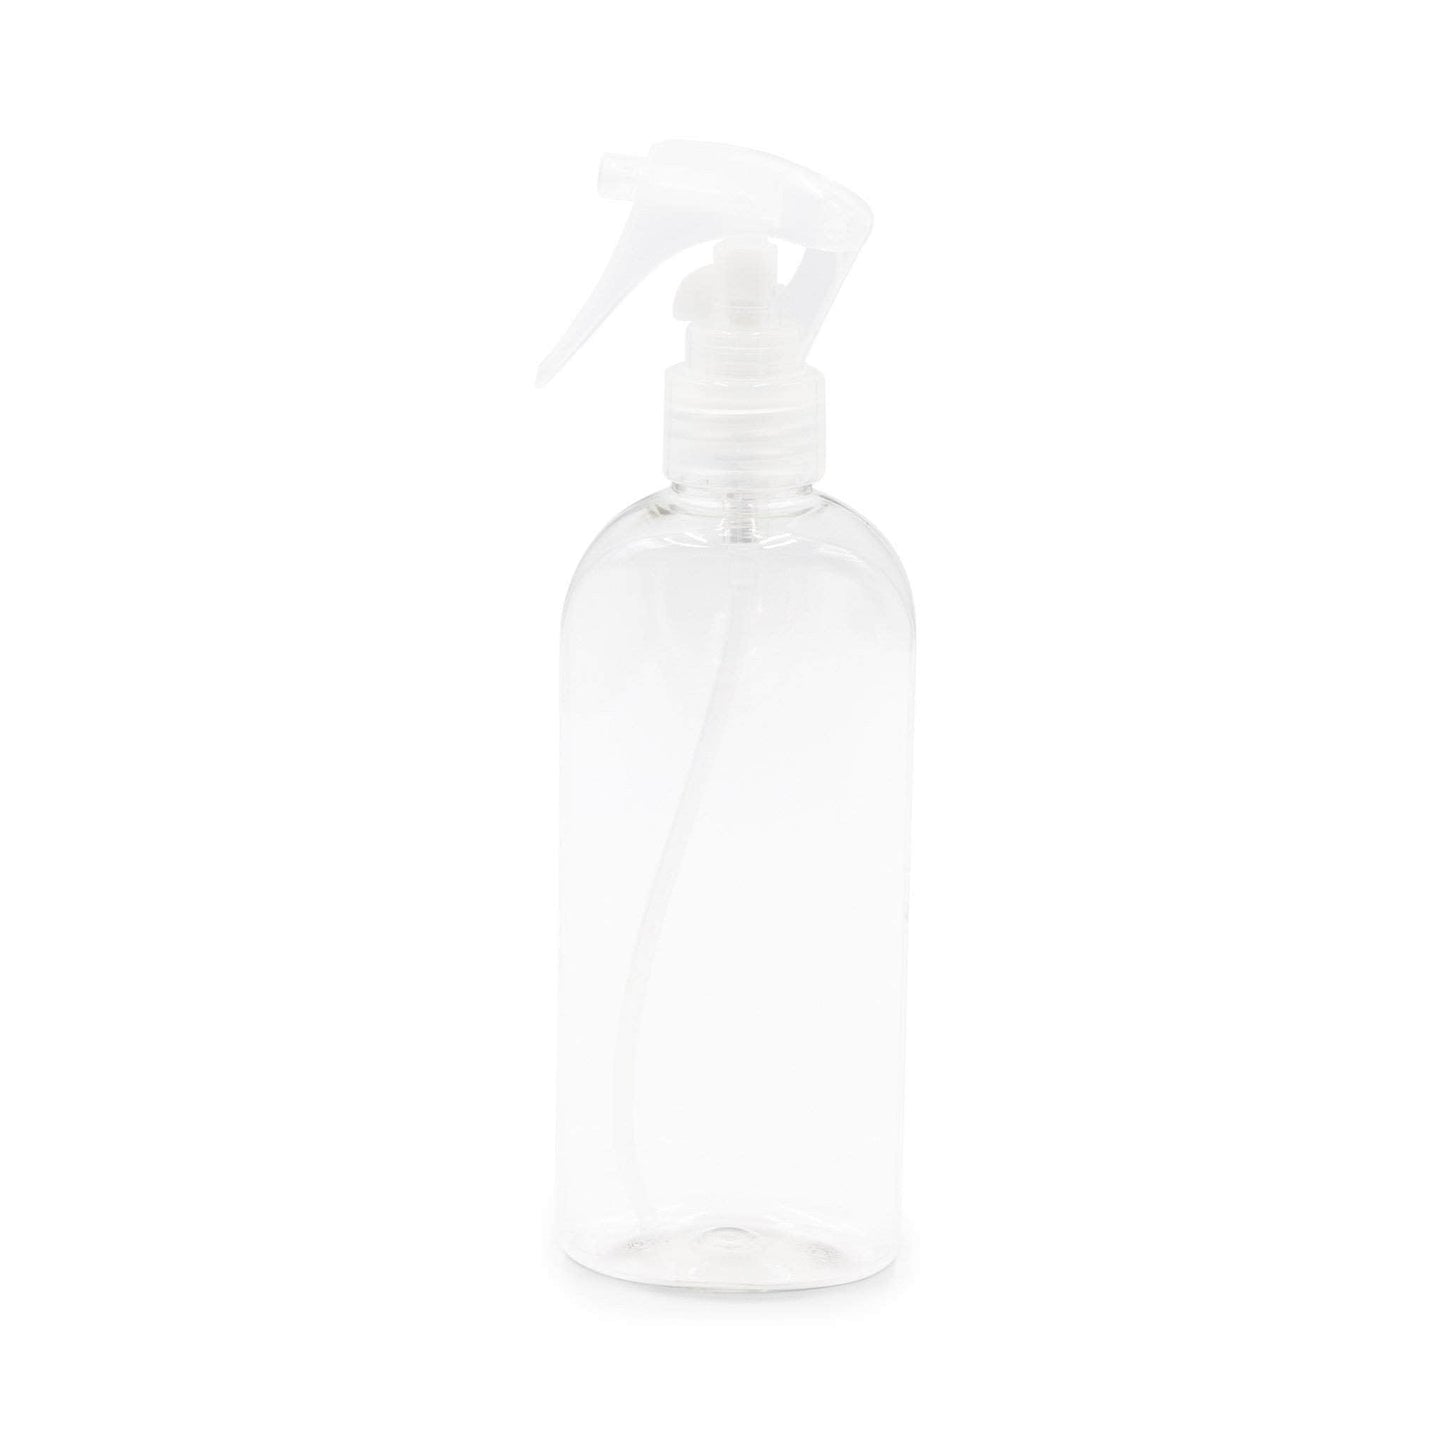 Faerly Bottles 250ml Clear Recyclable PET Oval Bottle & Trigger Spray